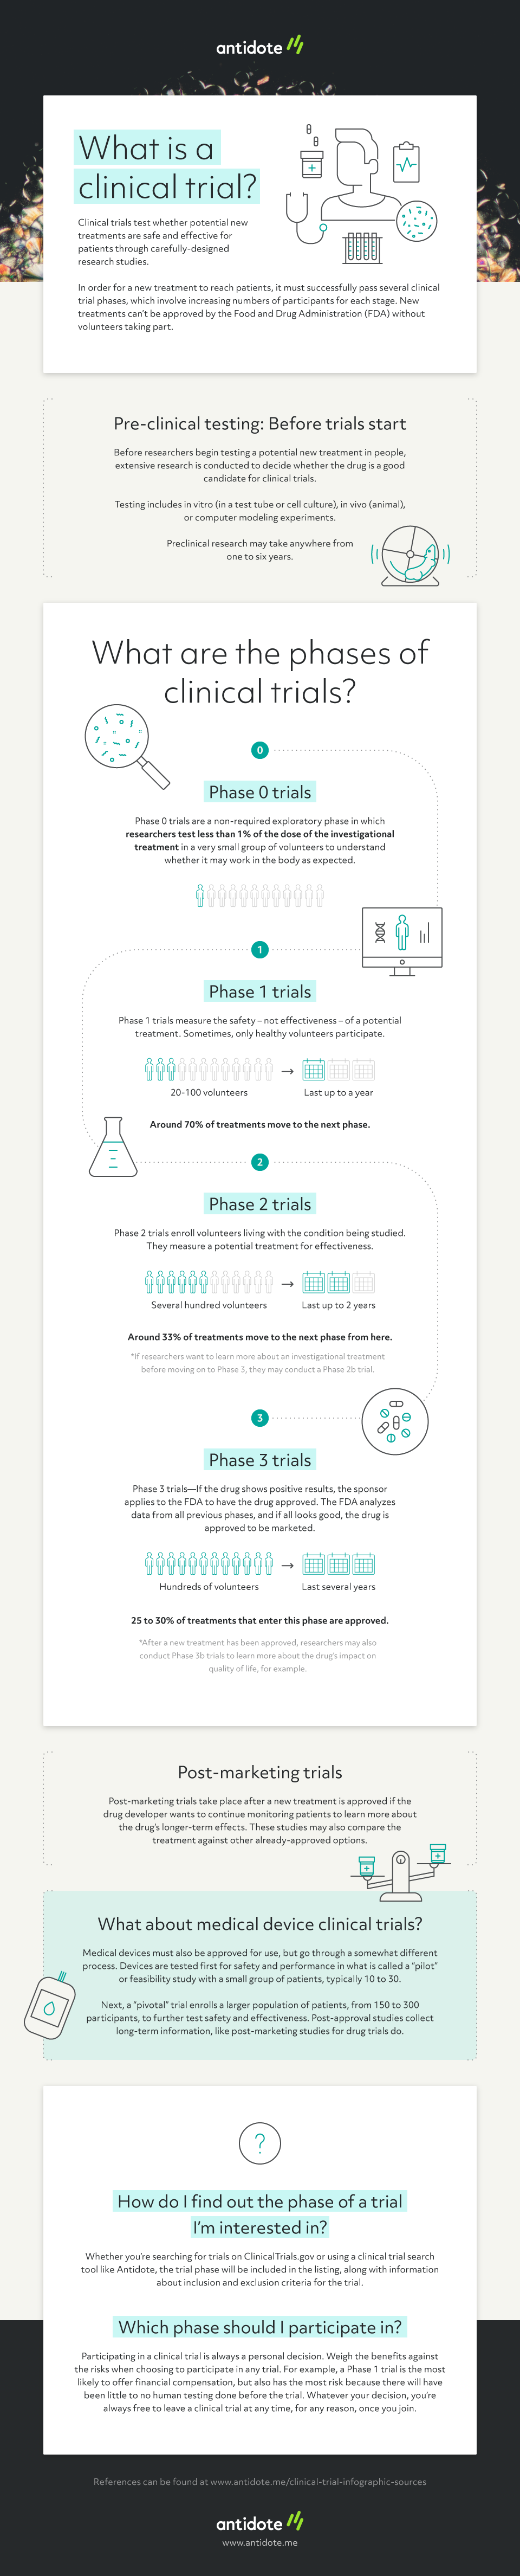 Clinical-Trial-Phases-Infographic